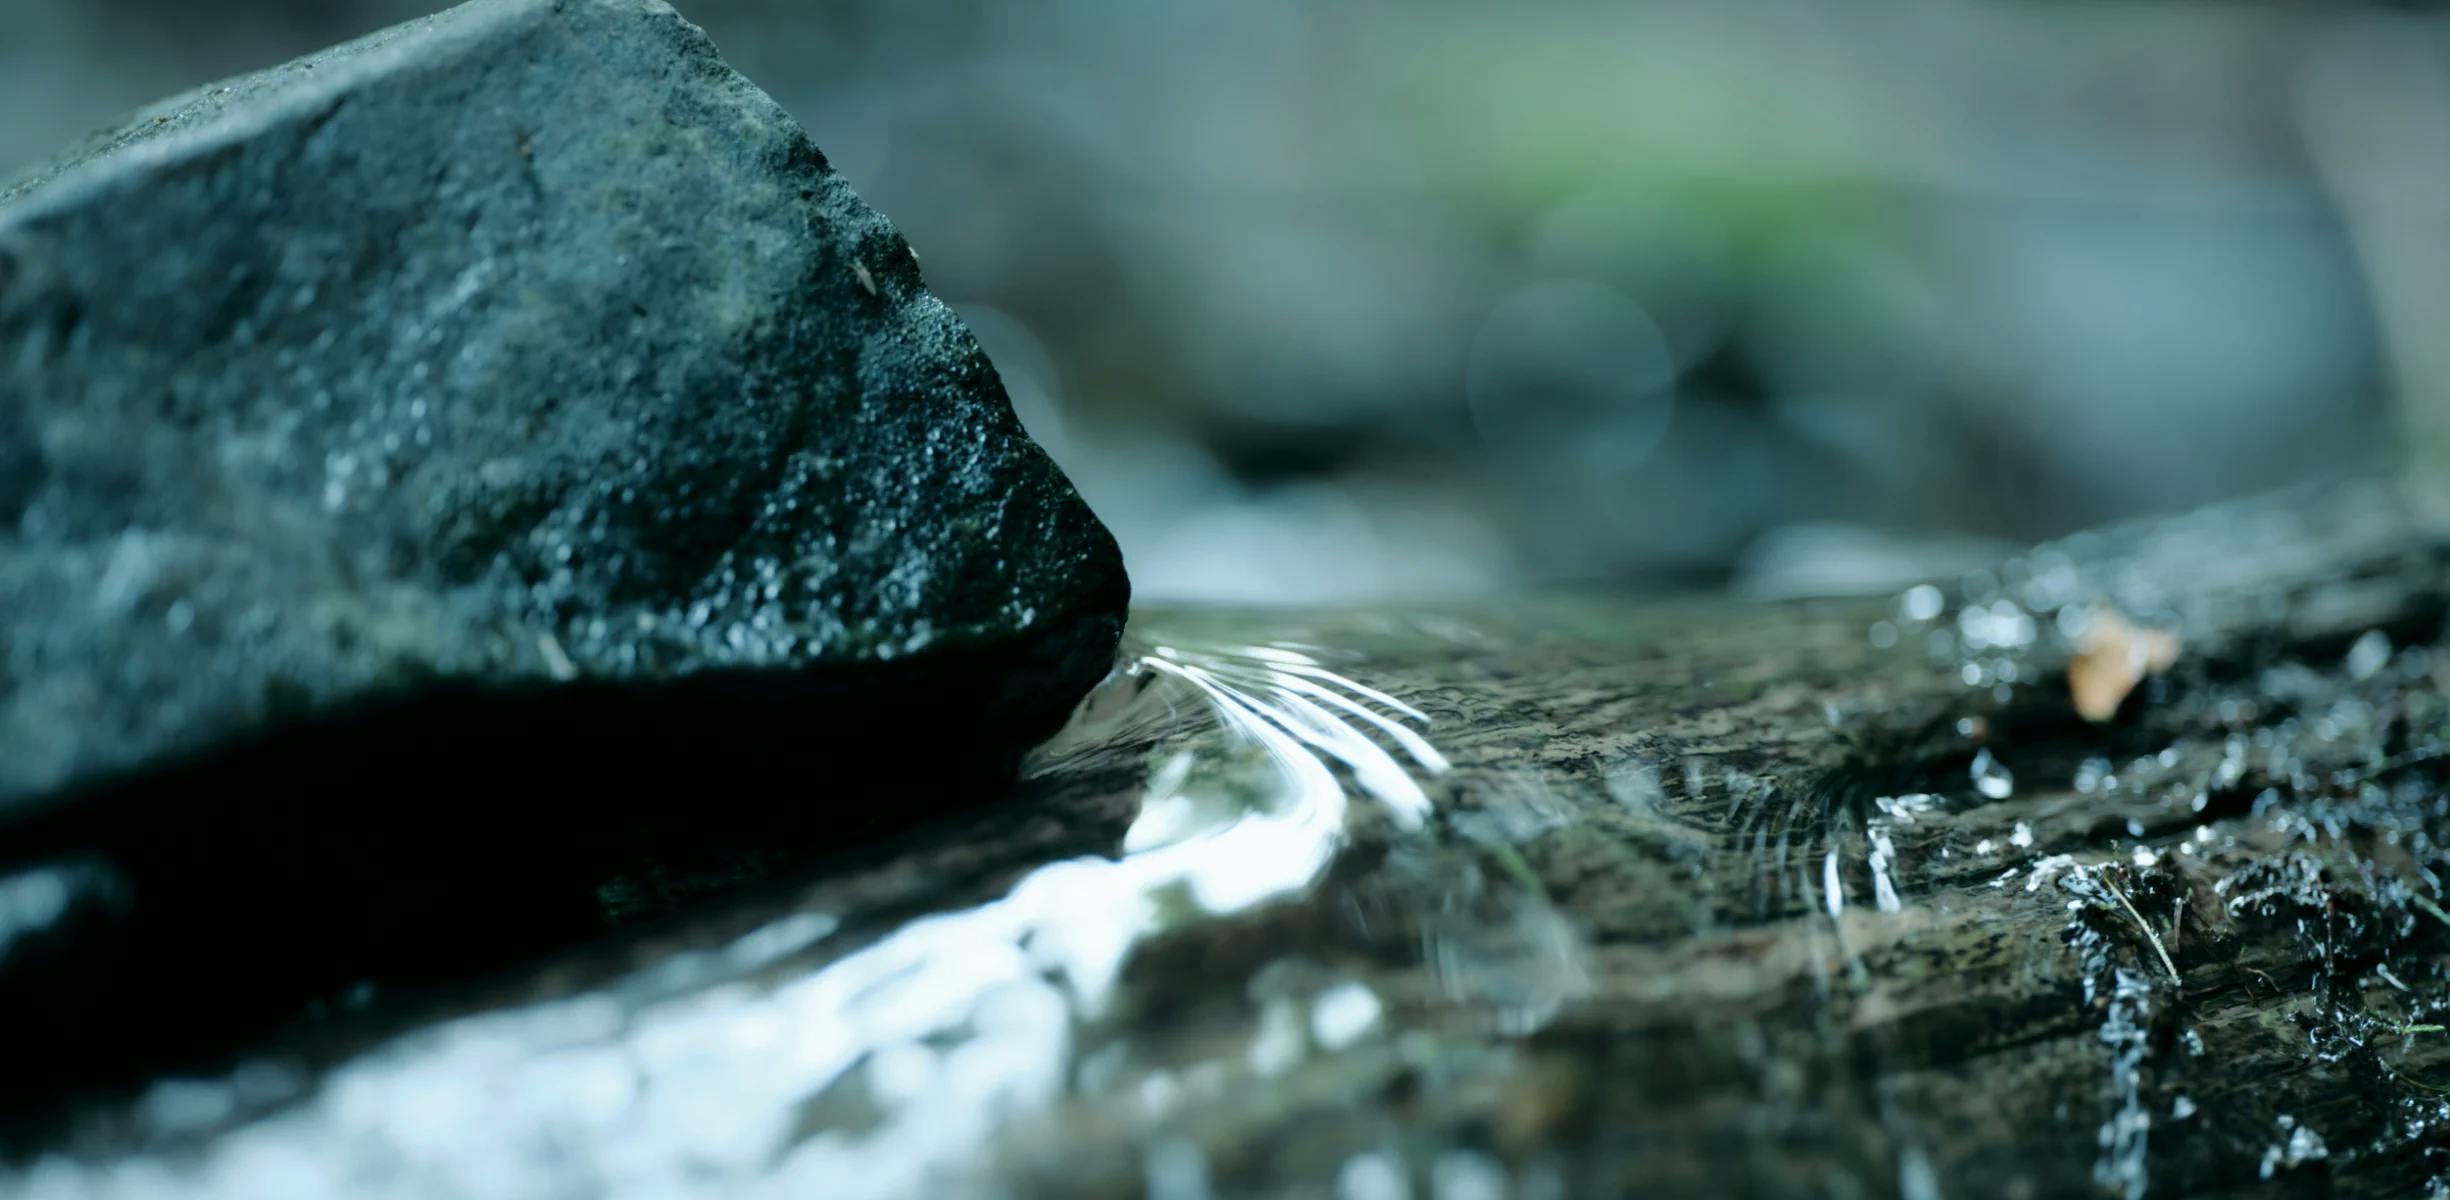 A picture of mountain stream water on a log, next to a rock.